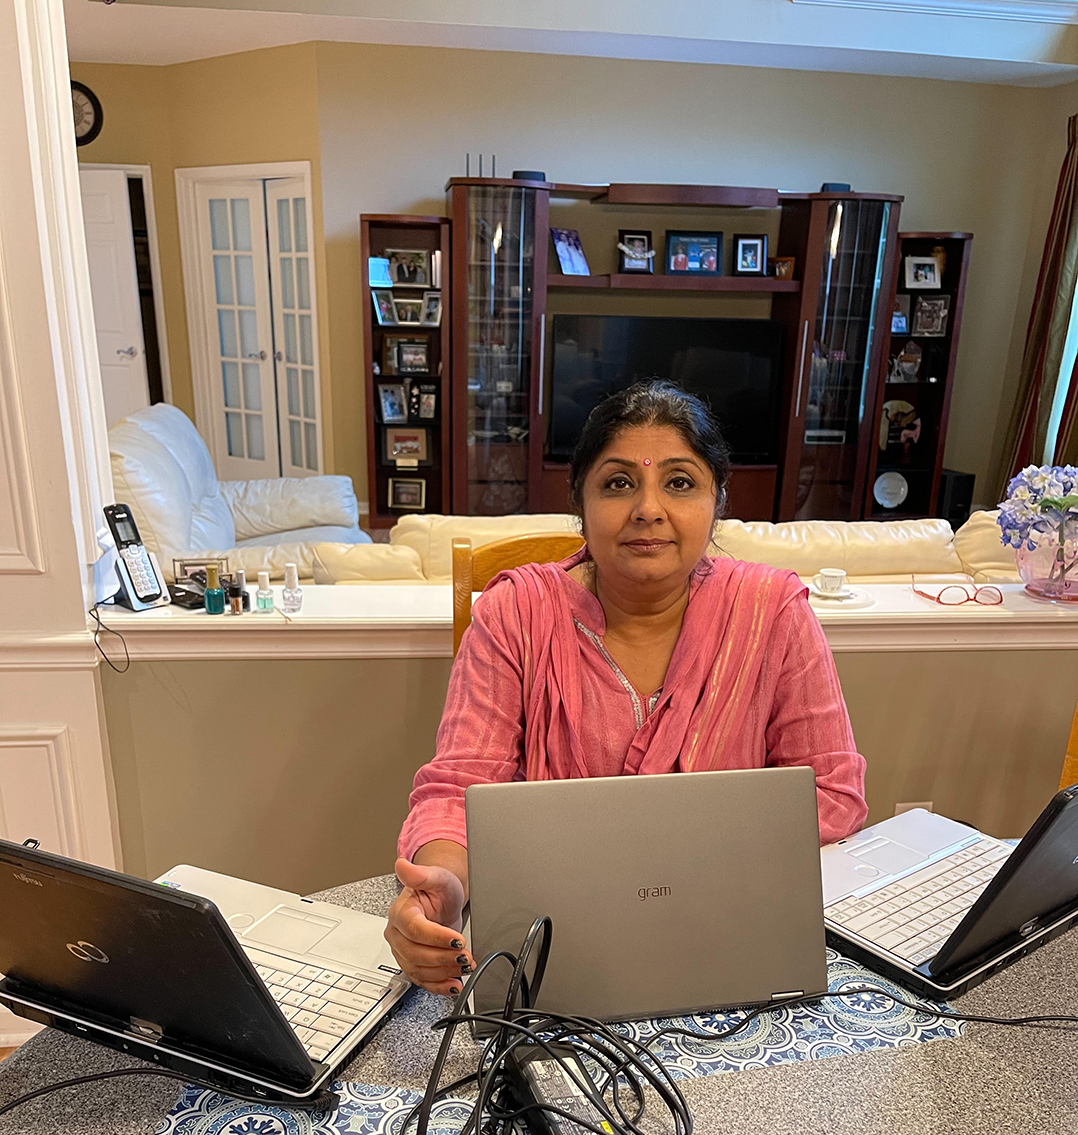 Fishers woman collects computers for Afghan refugee teens